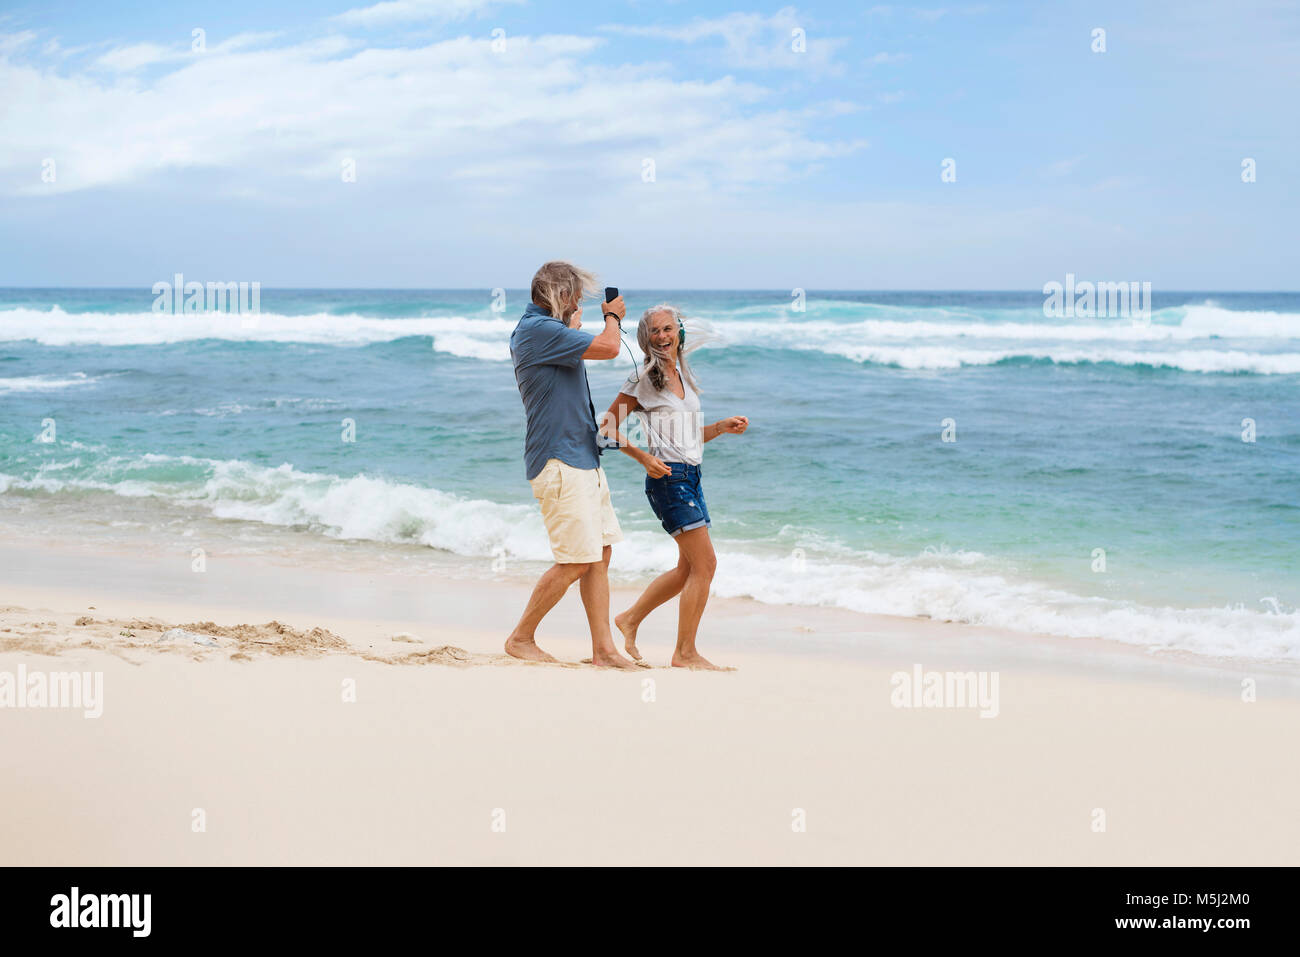 Handsome senior couple with headphones dancing on the beach Stock Photo